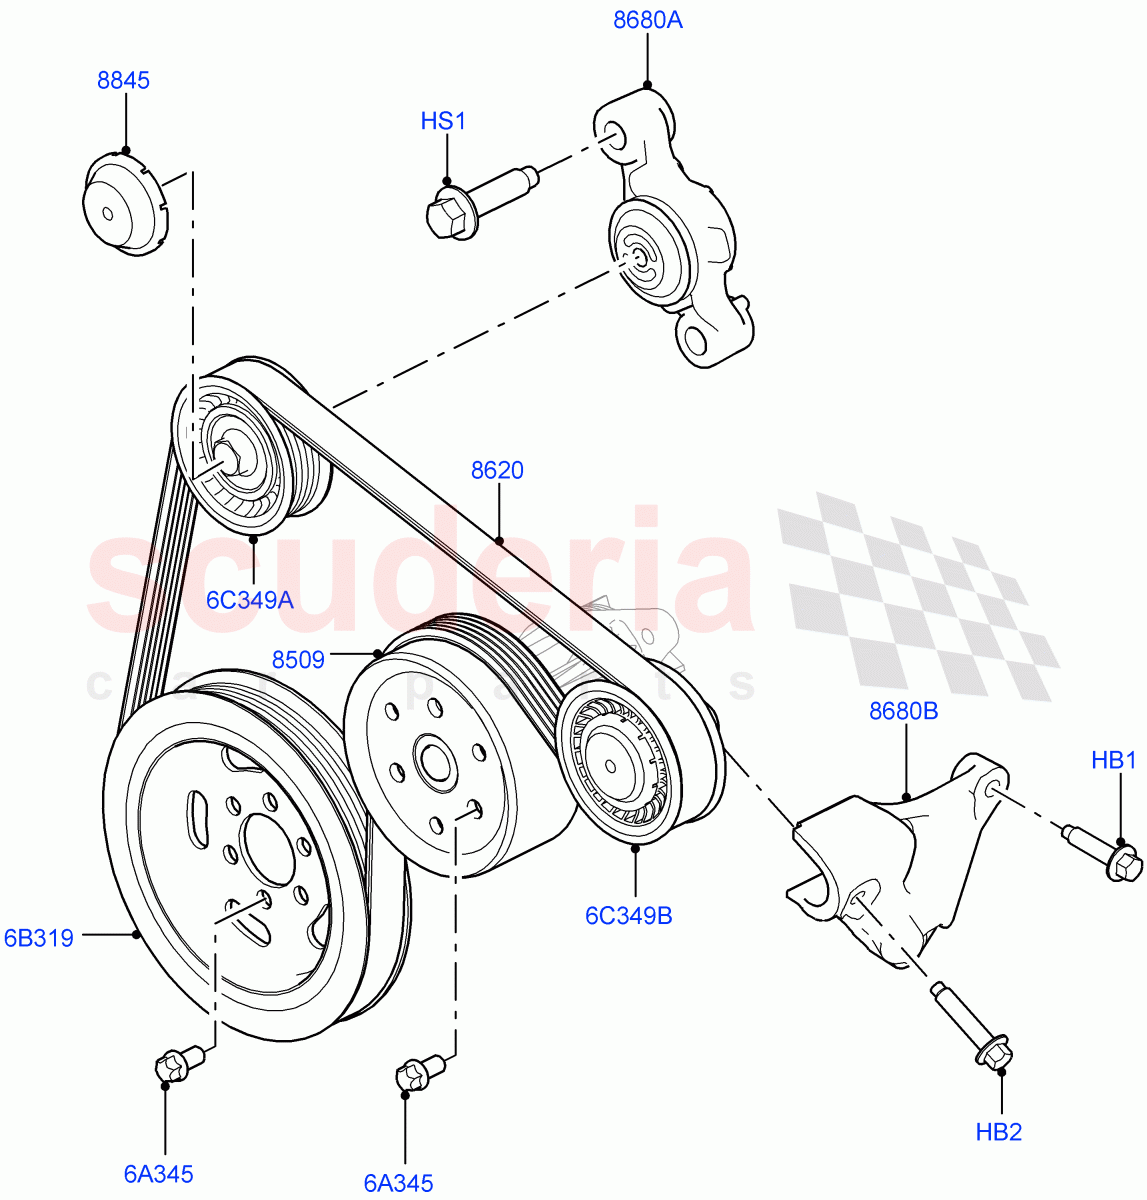 Pulleys And Drive Belts(Front)(3.0 V6 Diesel Electric Hybrid Eng,8 Speed Auto Trans ZF 8HP70 HEV 4WD,3.0 V6 D Gen2 Mono Turbo,3.0 V6 D Gen2 Twin Turbo)((V)FROMFA000001) of Land Rover Land Rover Range Rover Sport (2014+) [3.0 Diesel 24V DOHC TC]